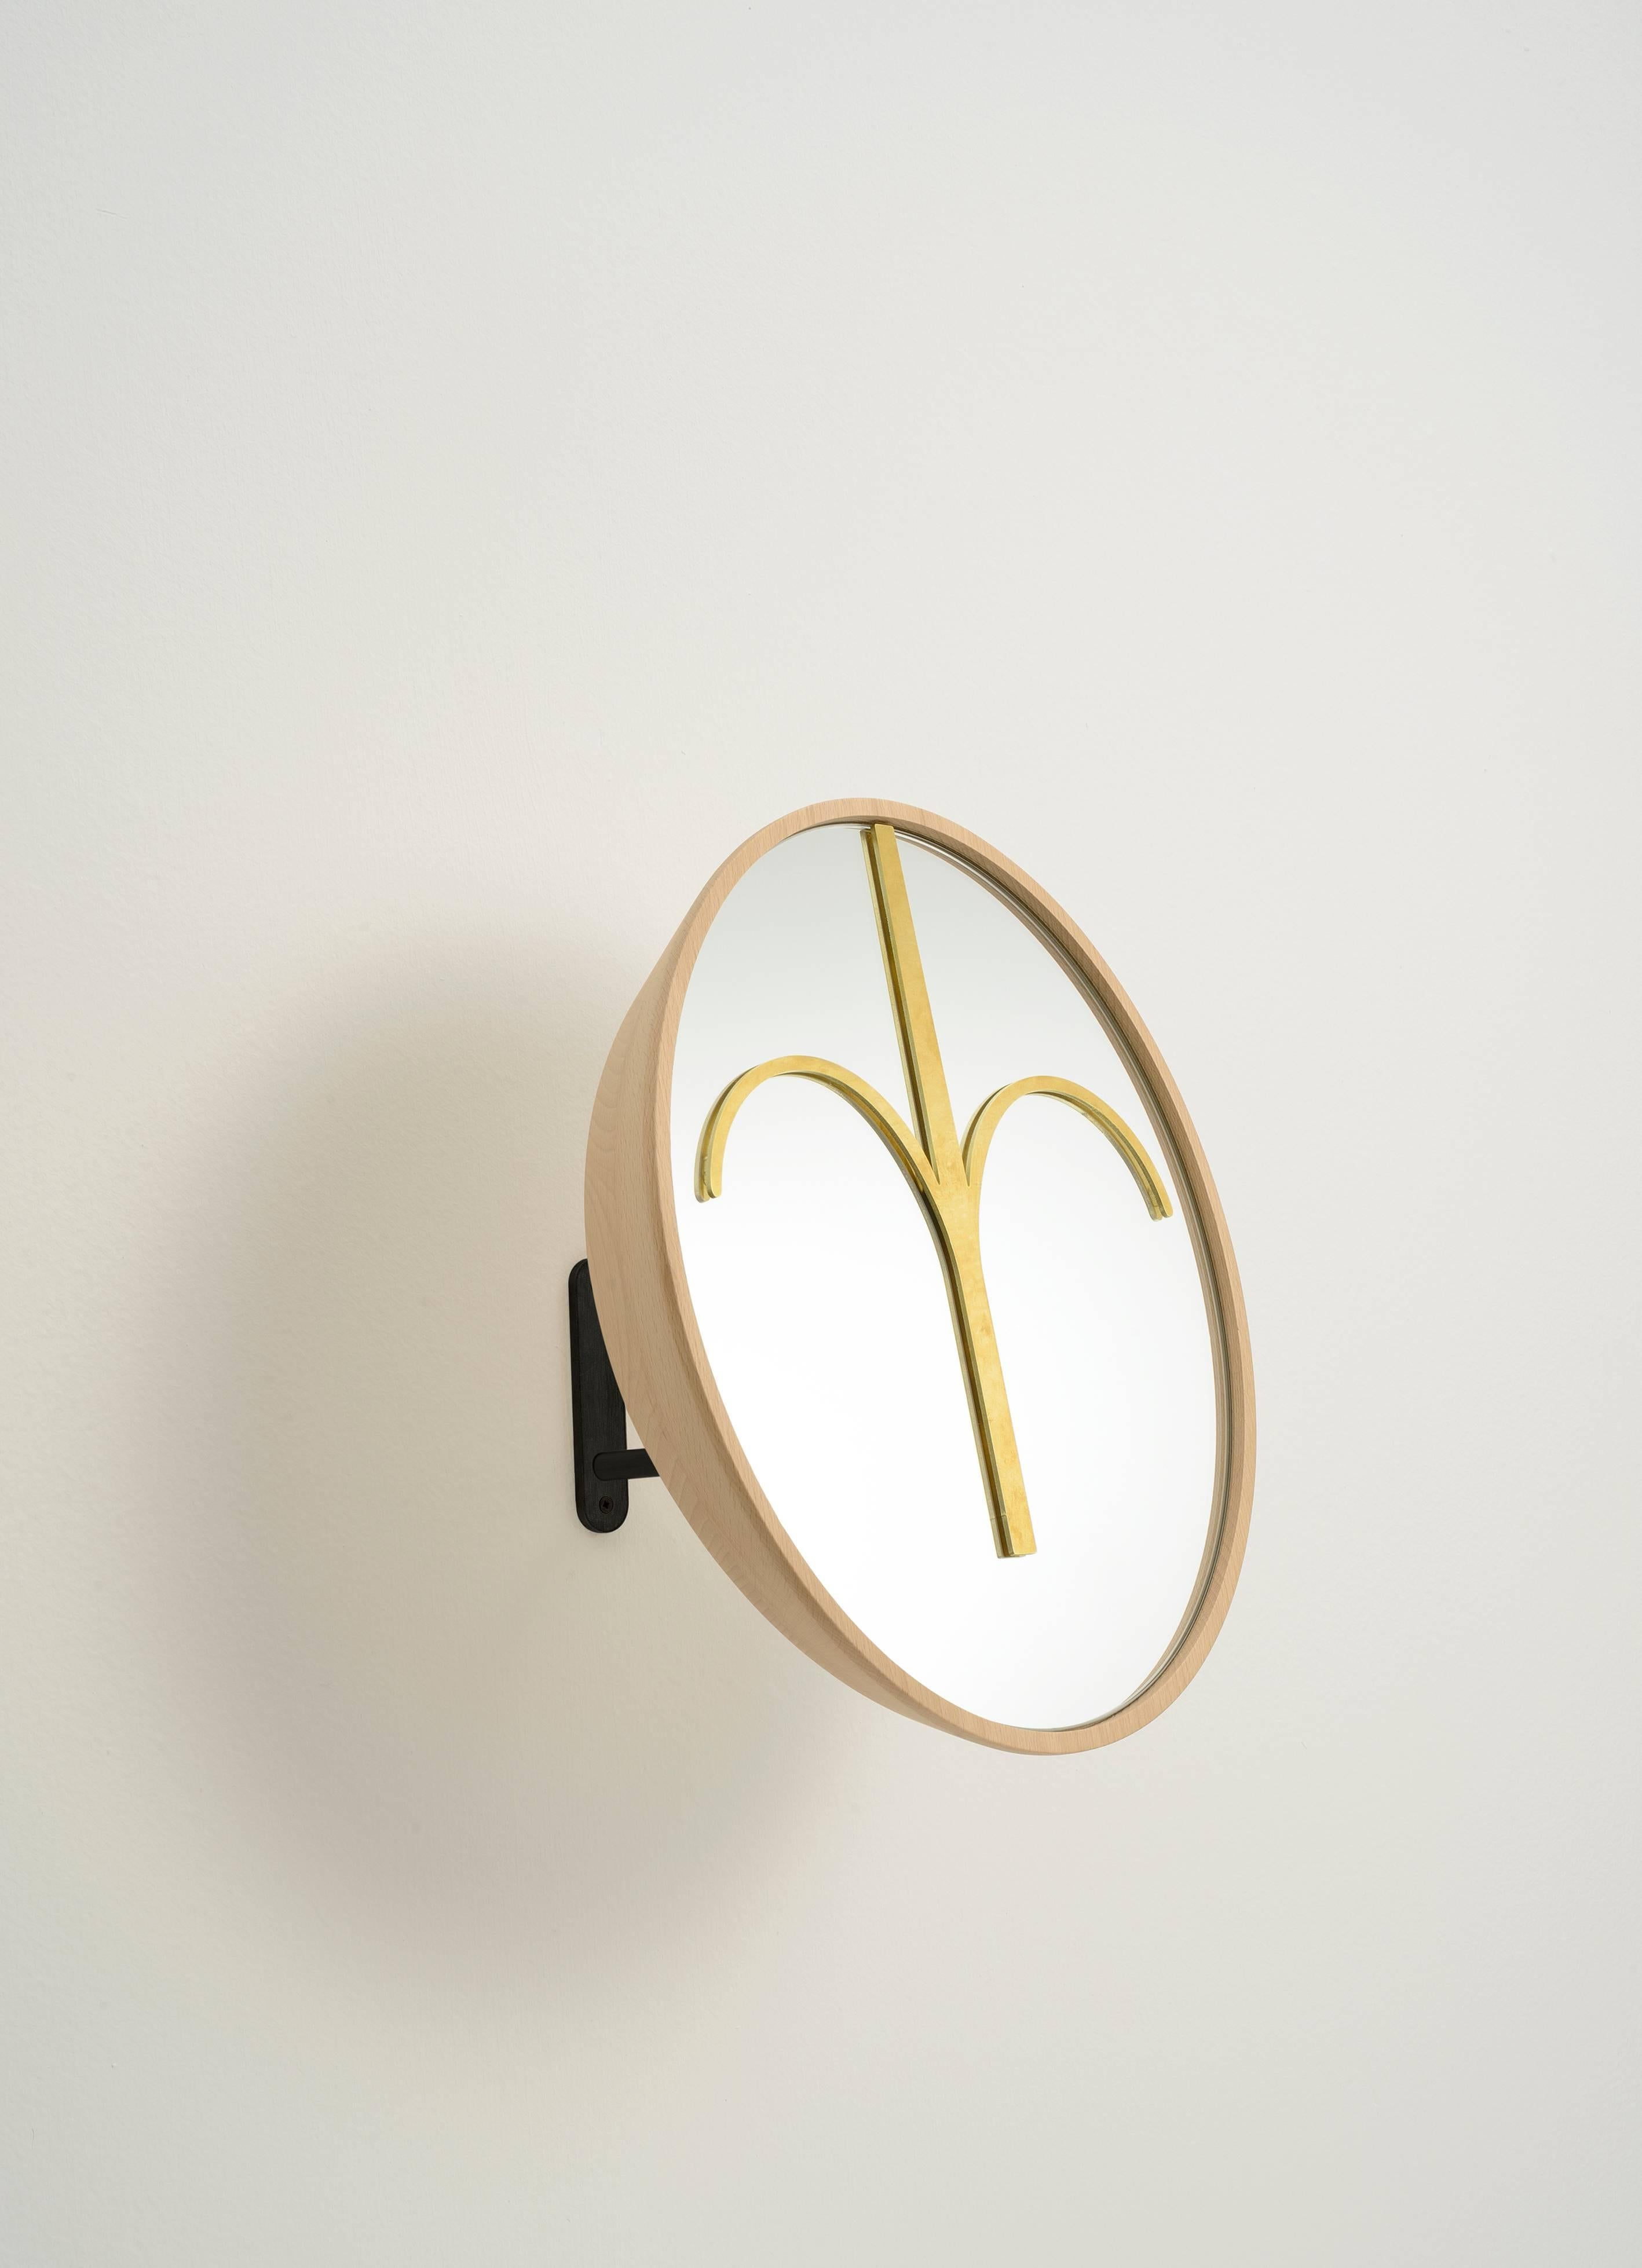 A functional mirror for a dressing room, or wooden masks and sculpture for your living or your entrance. The rounded mask Haua is made of natural beech wood, with a brass element on the mirror. The base is an iron stand black lacquered, but upon